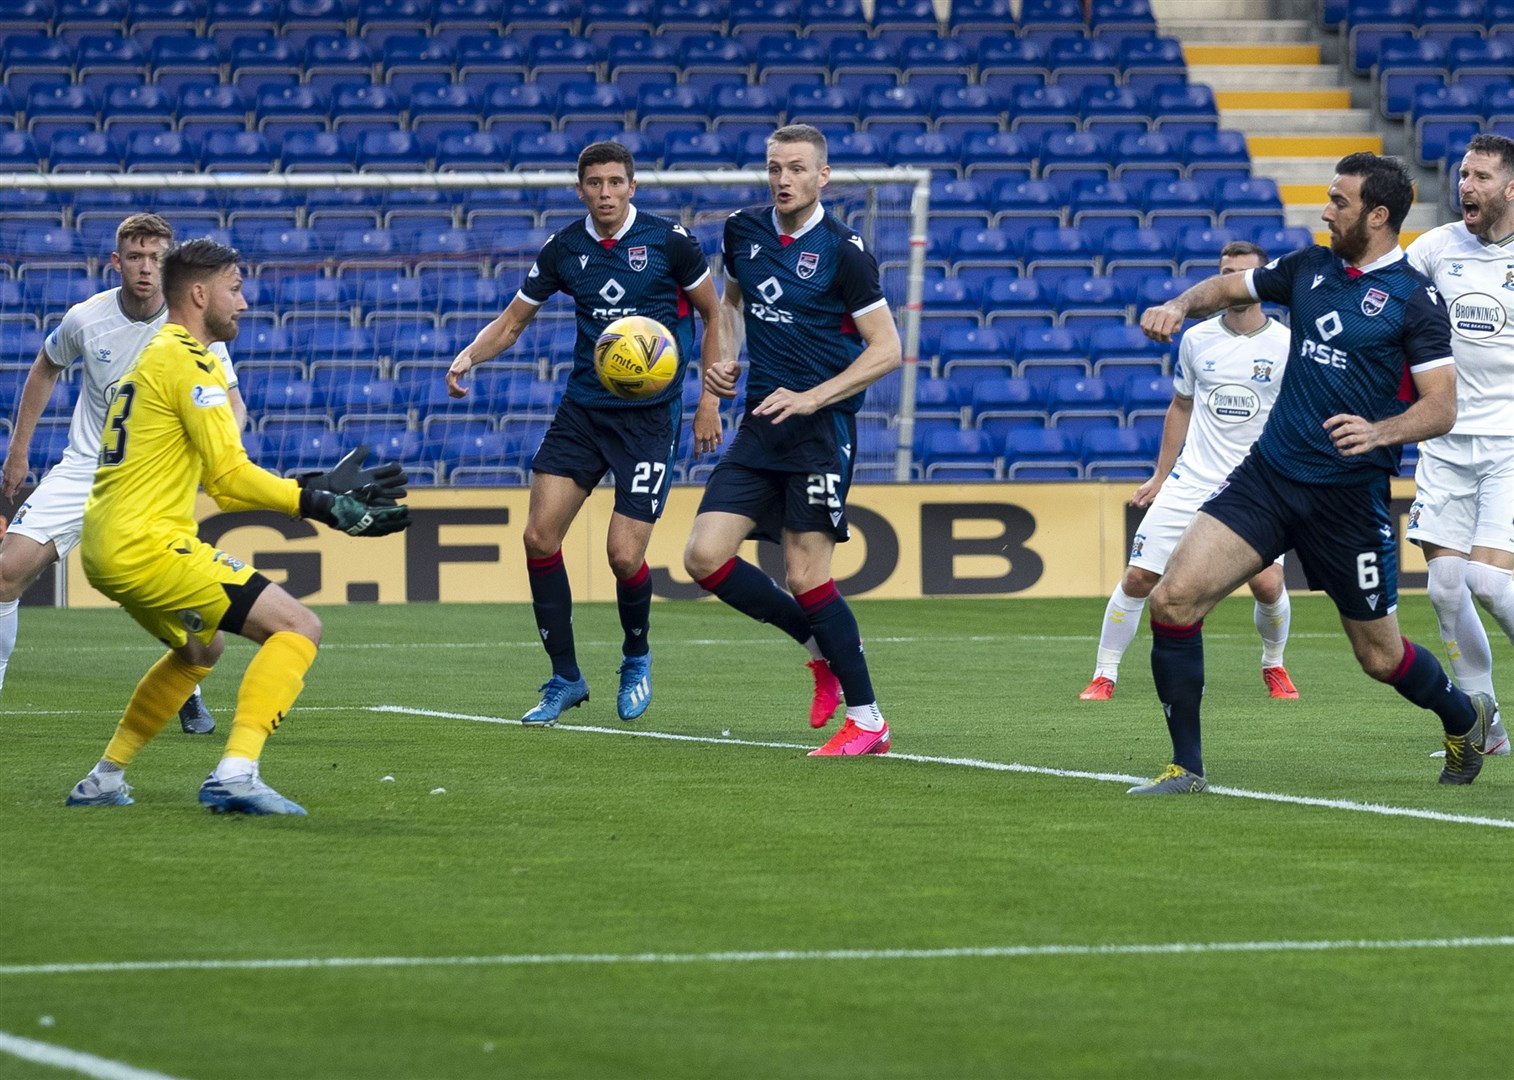 Picture - Ken Macpherson, Inverness. Ross County(2) v Kilmarnock(2). 12.08.20. Ross County's Ross Draper went so very close to scoring in the opening minute when he used his knee on the ball to try to beat Kilmarnock 'keeper Danny Rogers.